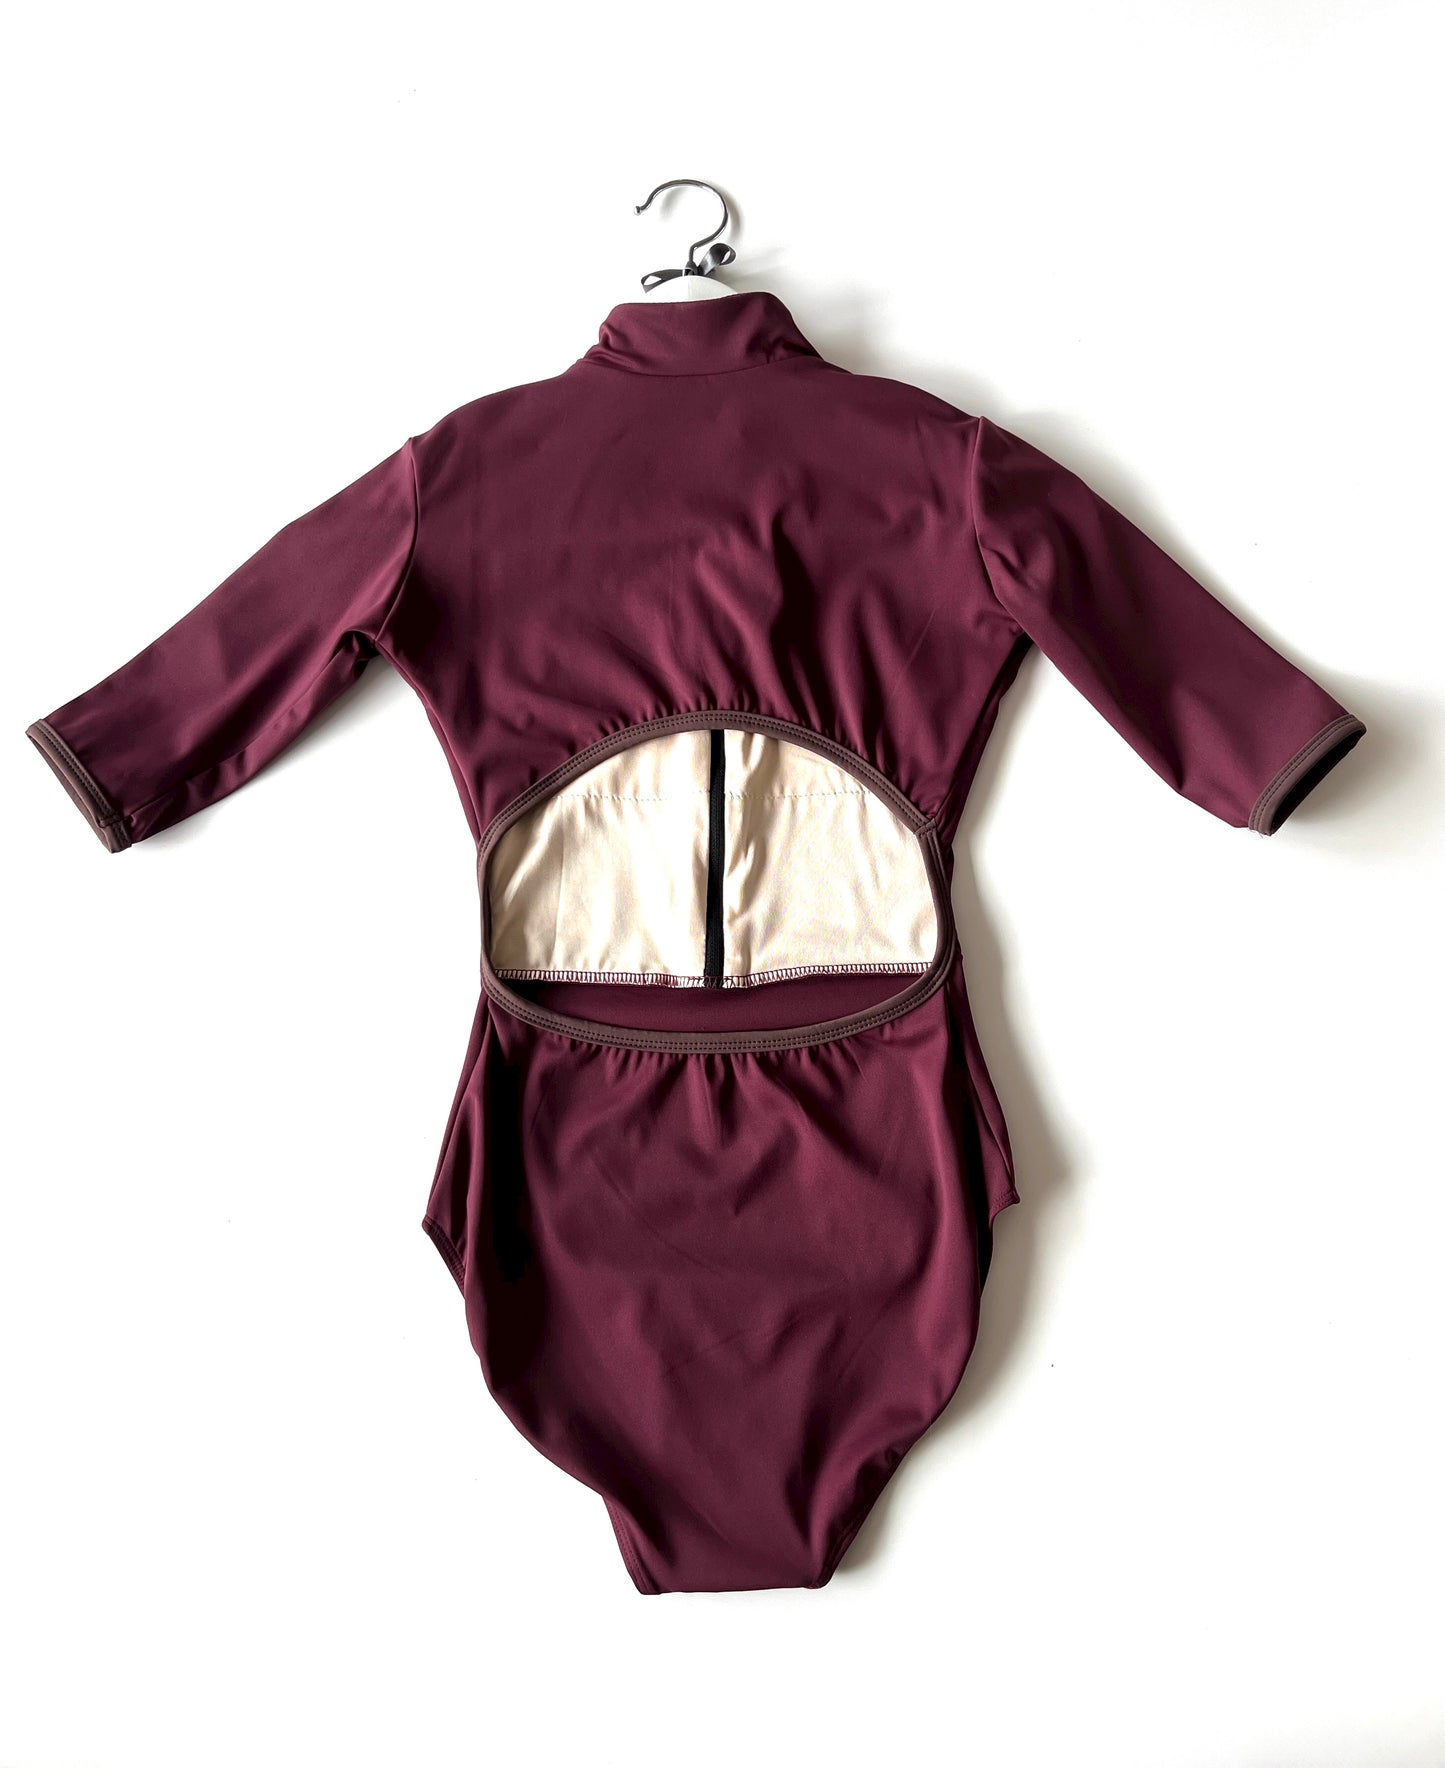 Zip up Leotard in burgundy with open back sold by The Collective Dancewear